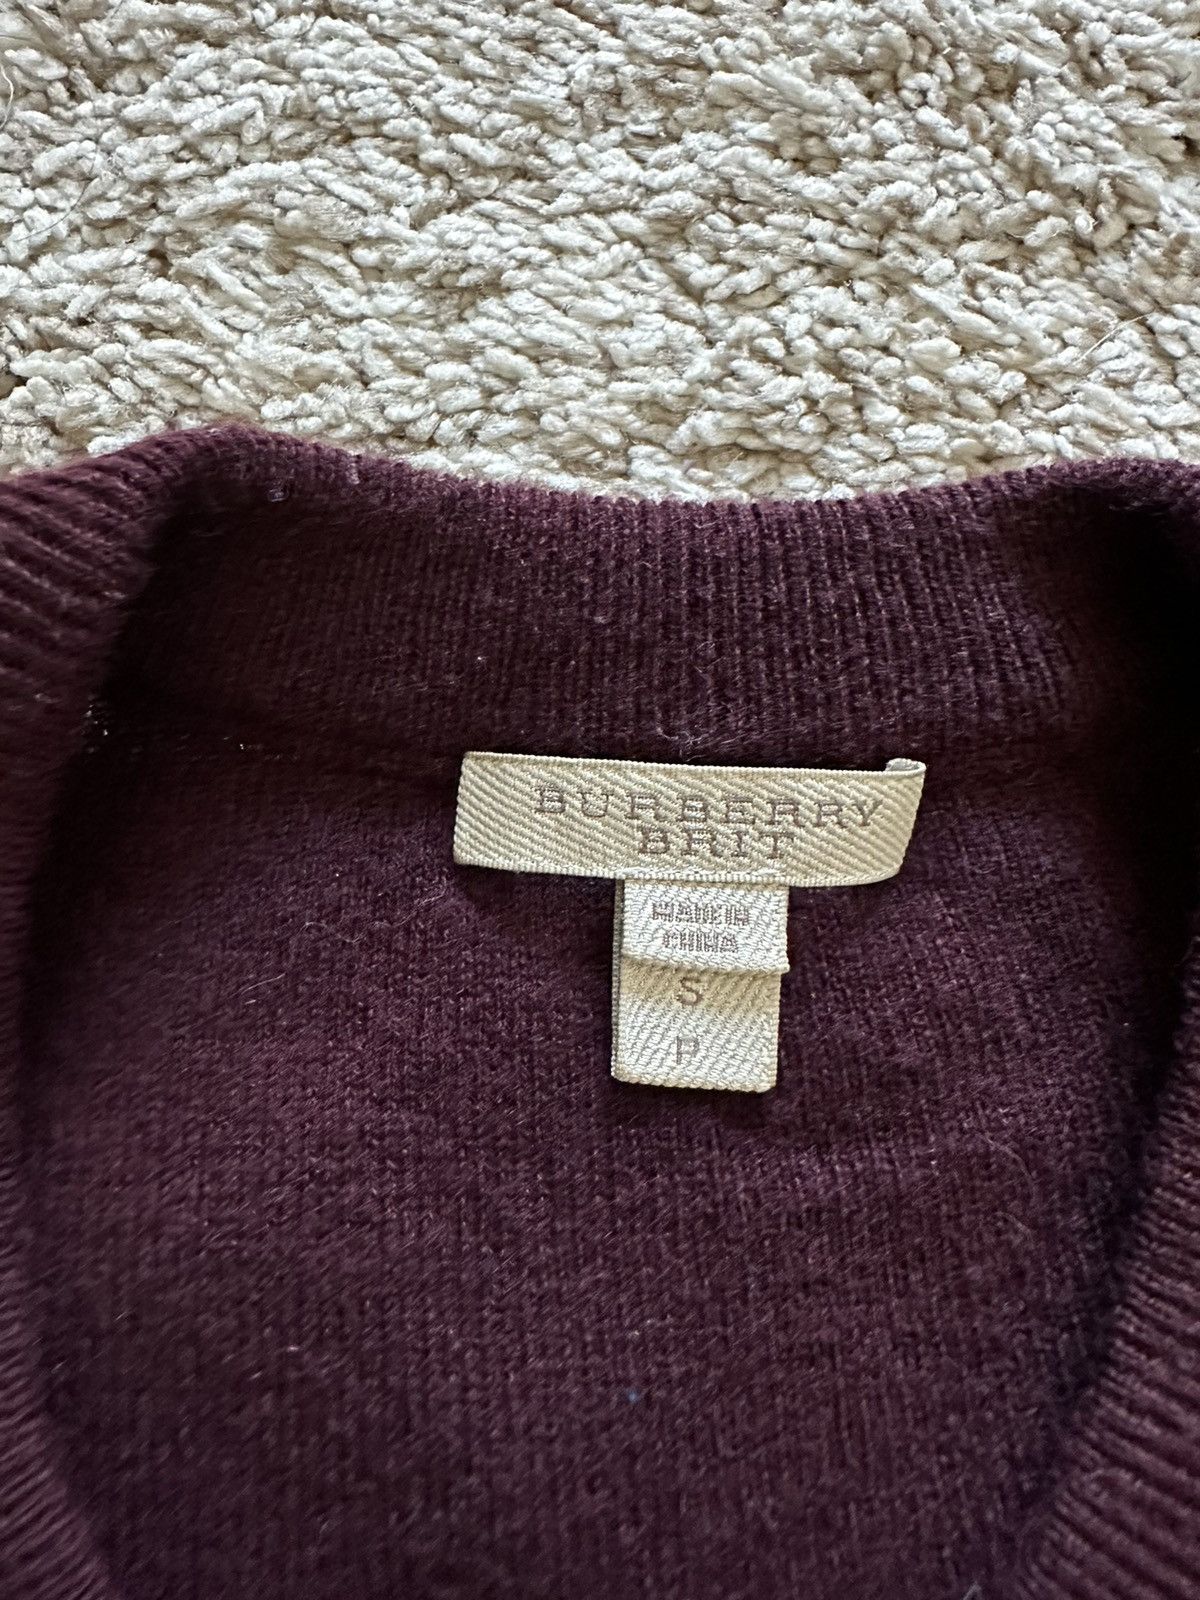 Burberry Burberry Brit Sweater Wool striped Small Size US S / EU 44-46 / 1 - 4 Thumbnail